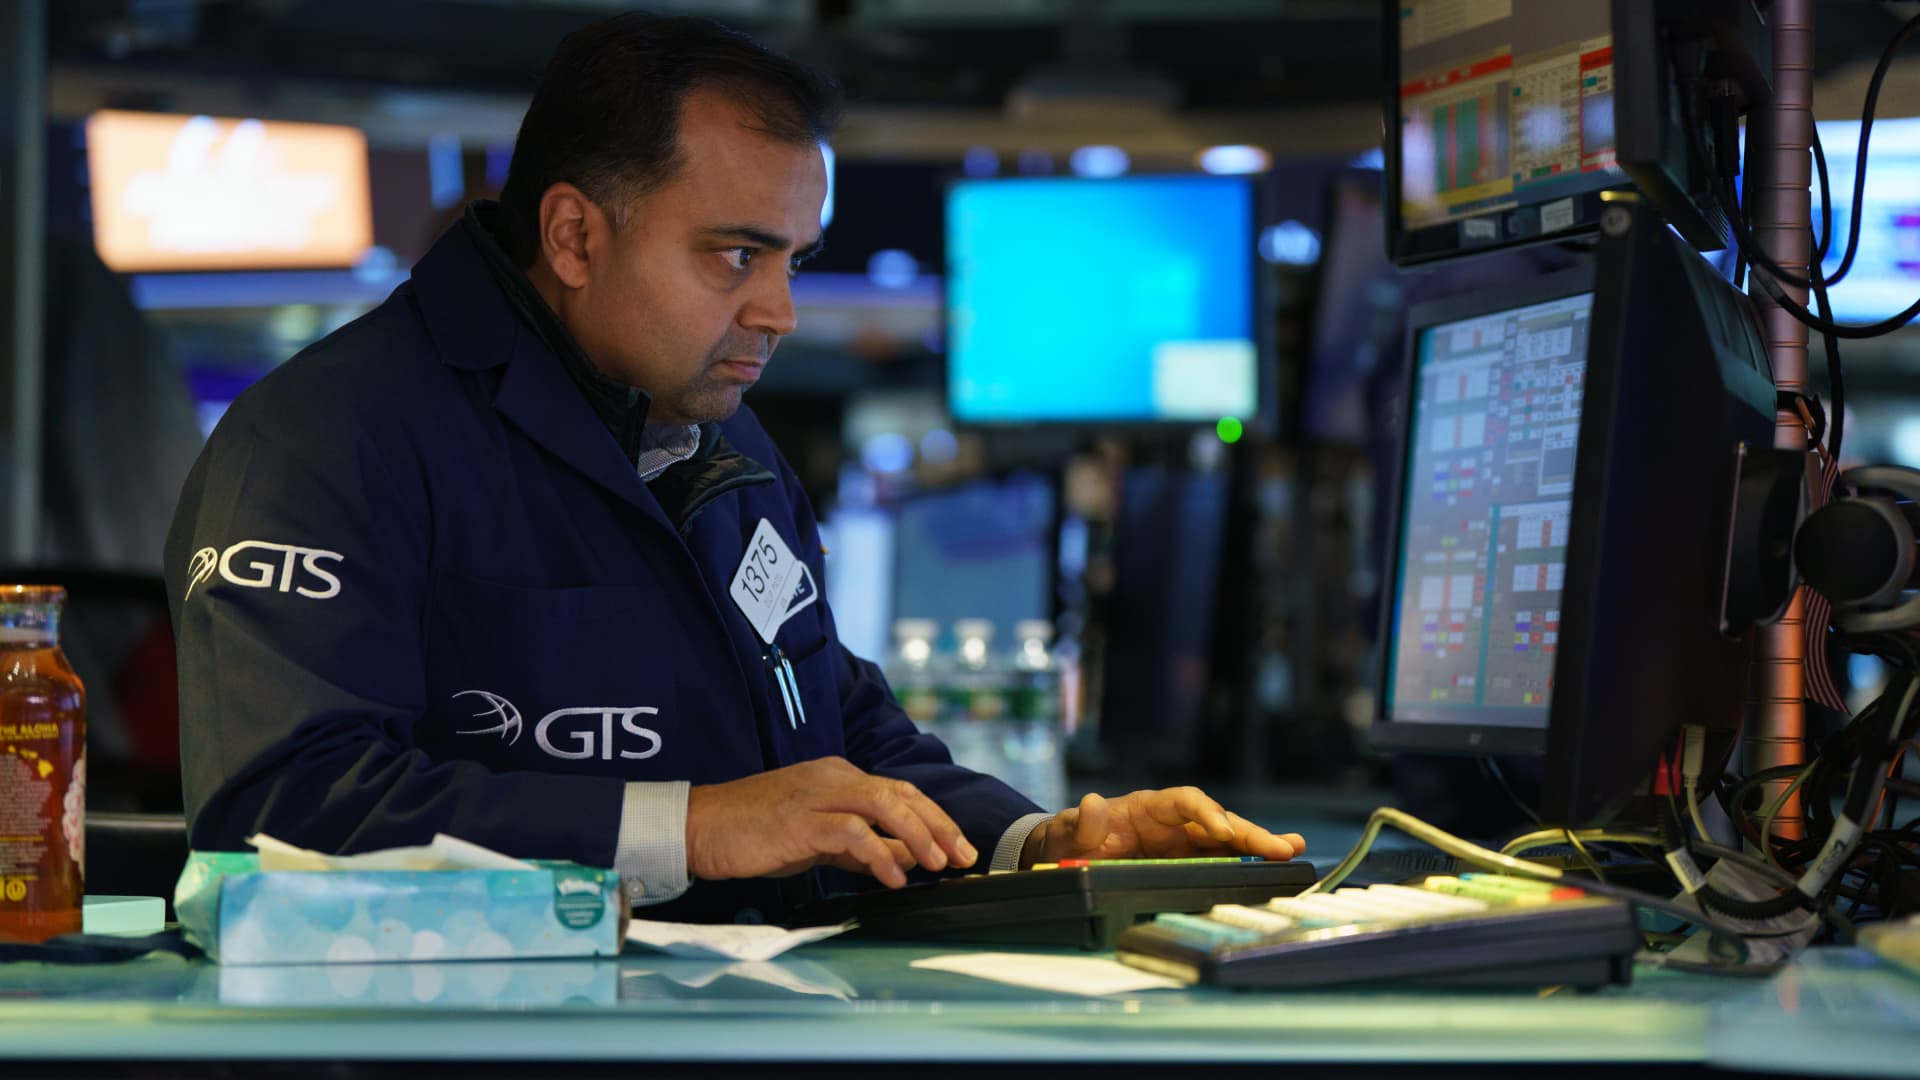 NYSE's Tuesday trading glitch explained — Why some of the trades may be busted